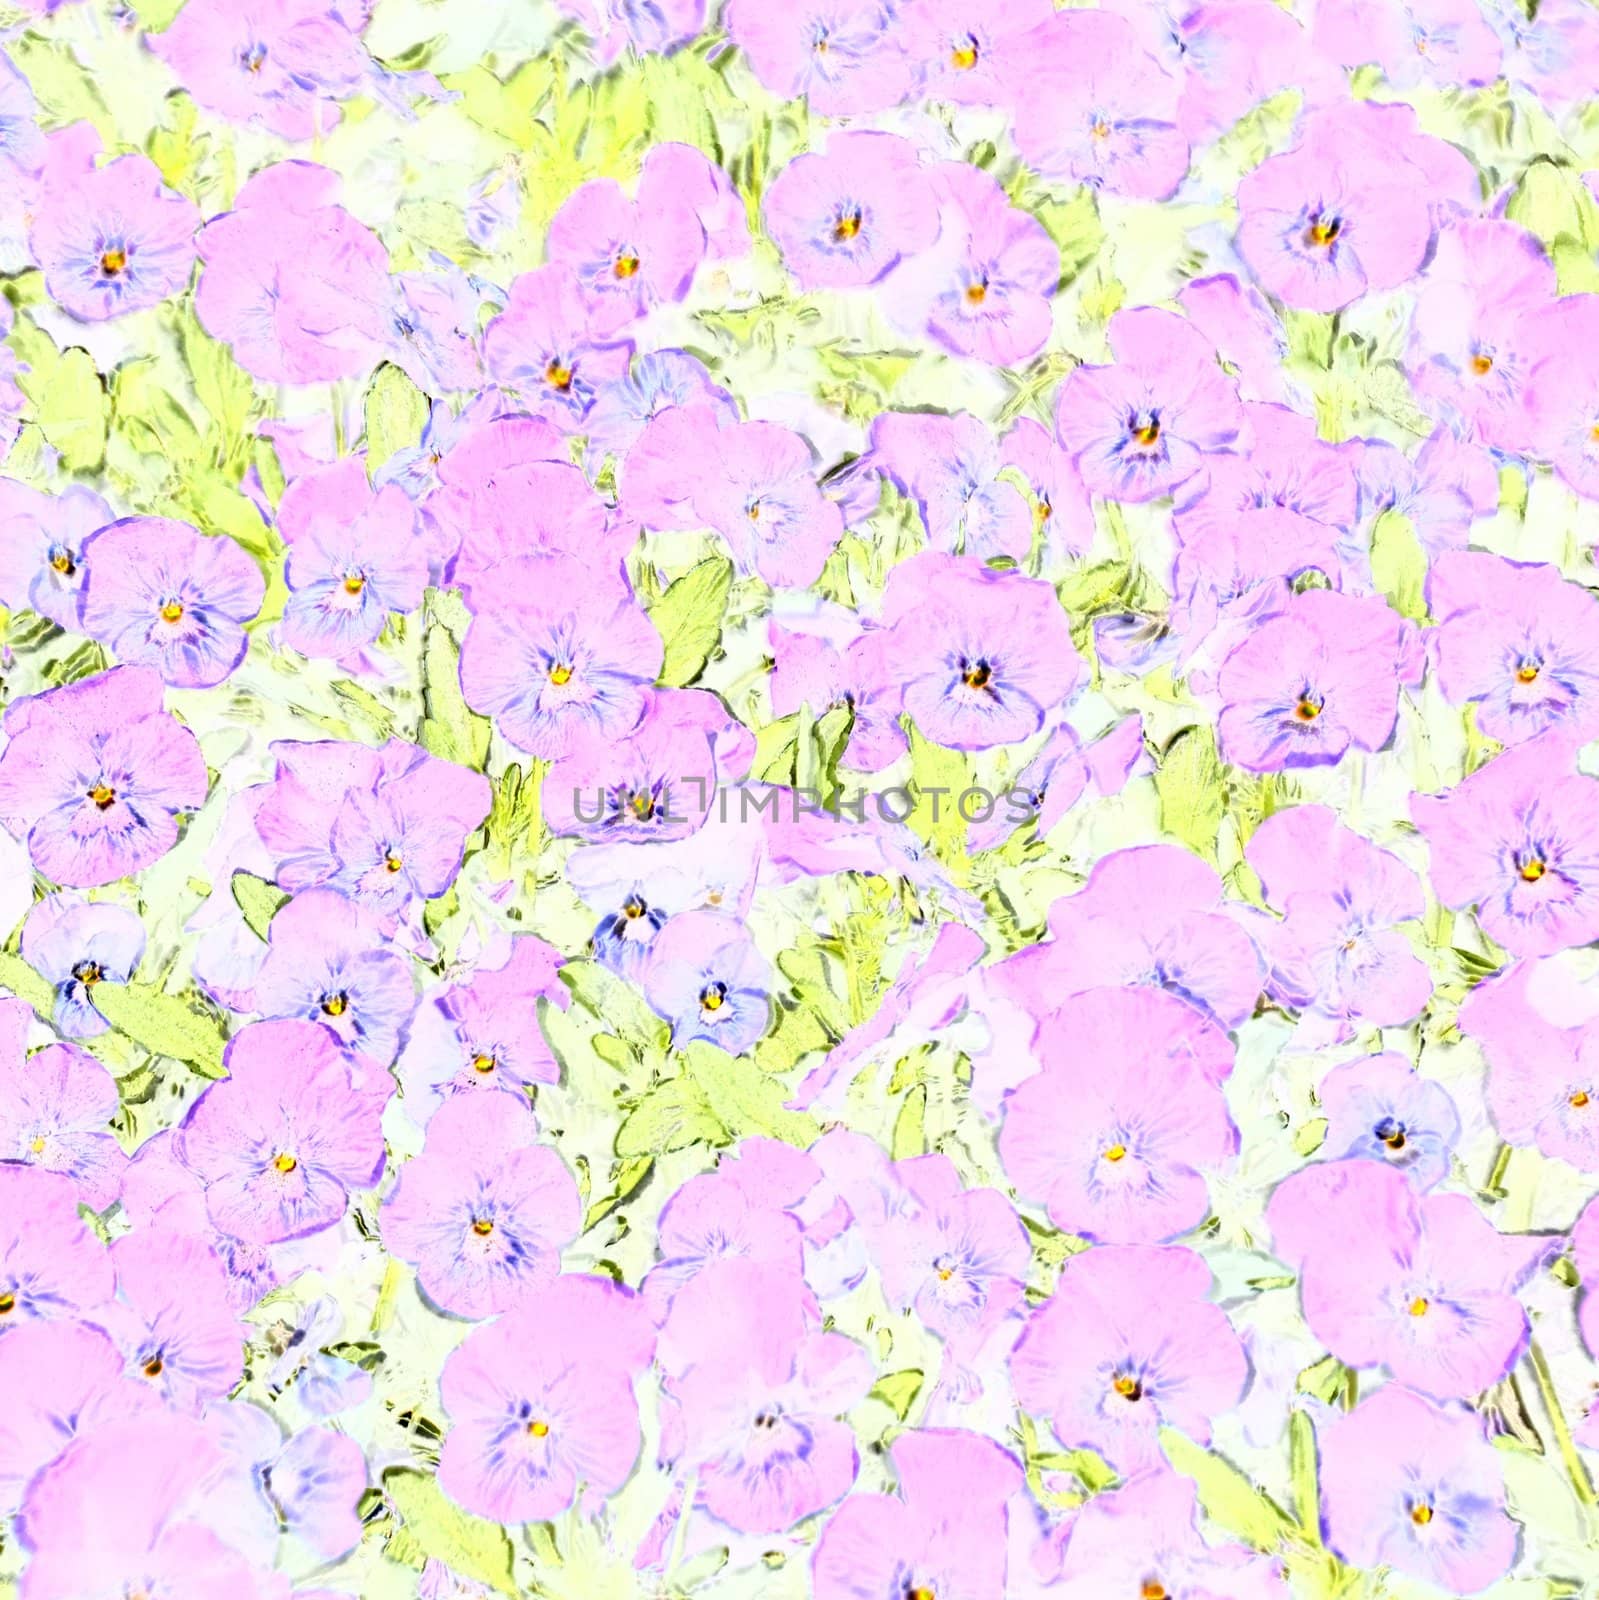 texture of many violet flowers in soft pastel colors